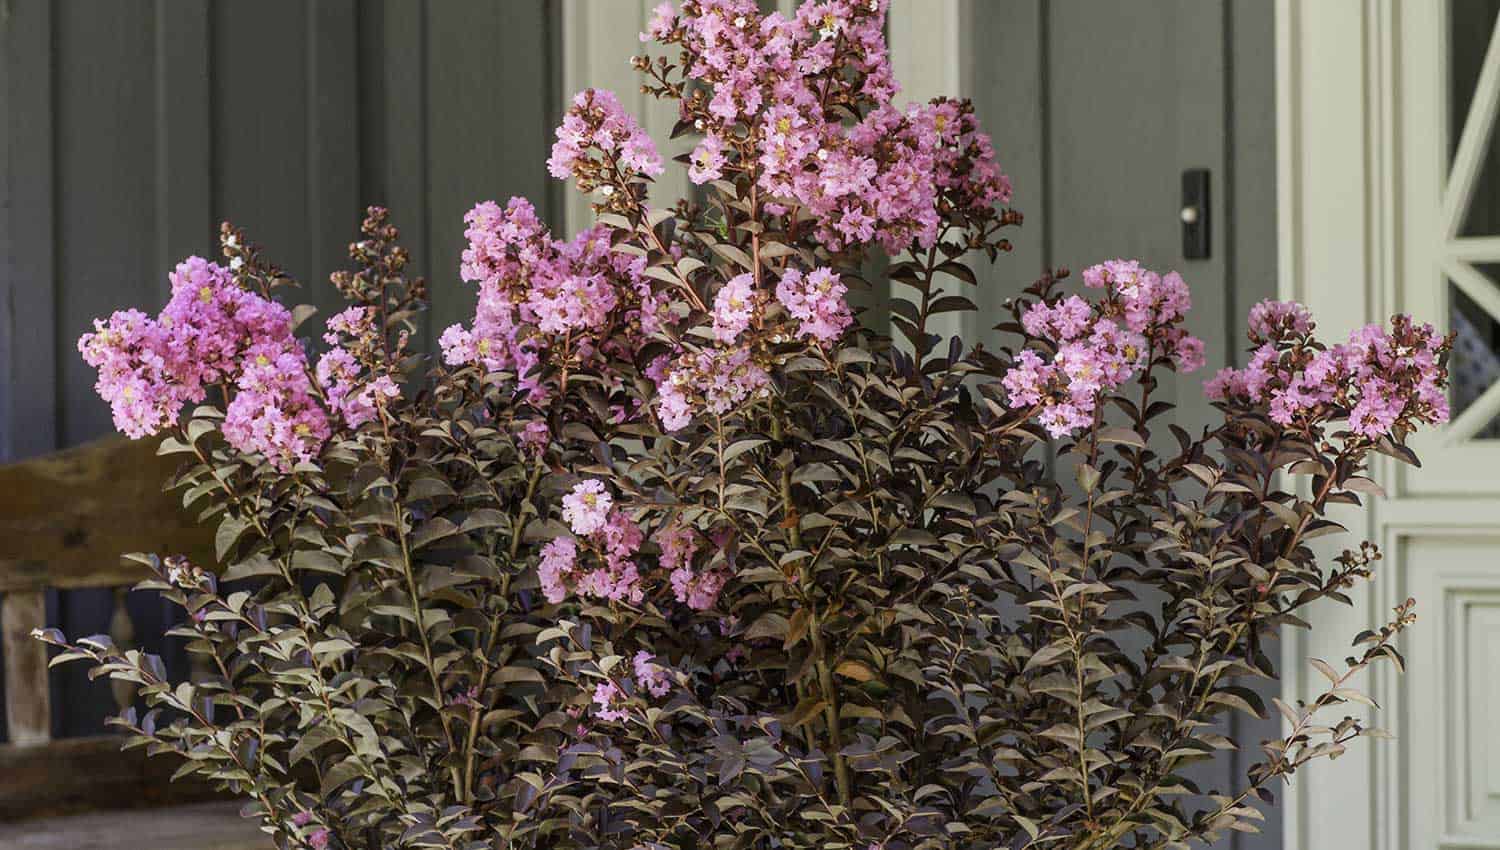 Pink crapemyrtle blooms and dark chocolate foliage adorn a front porch